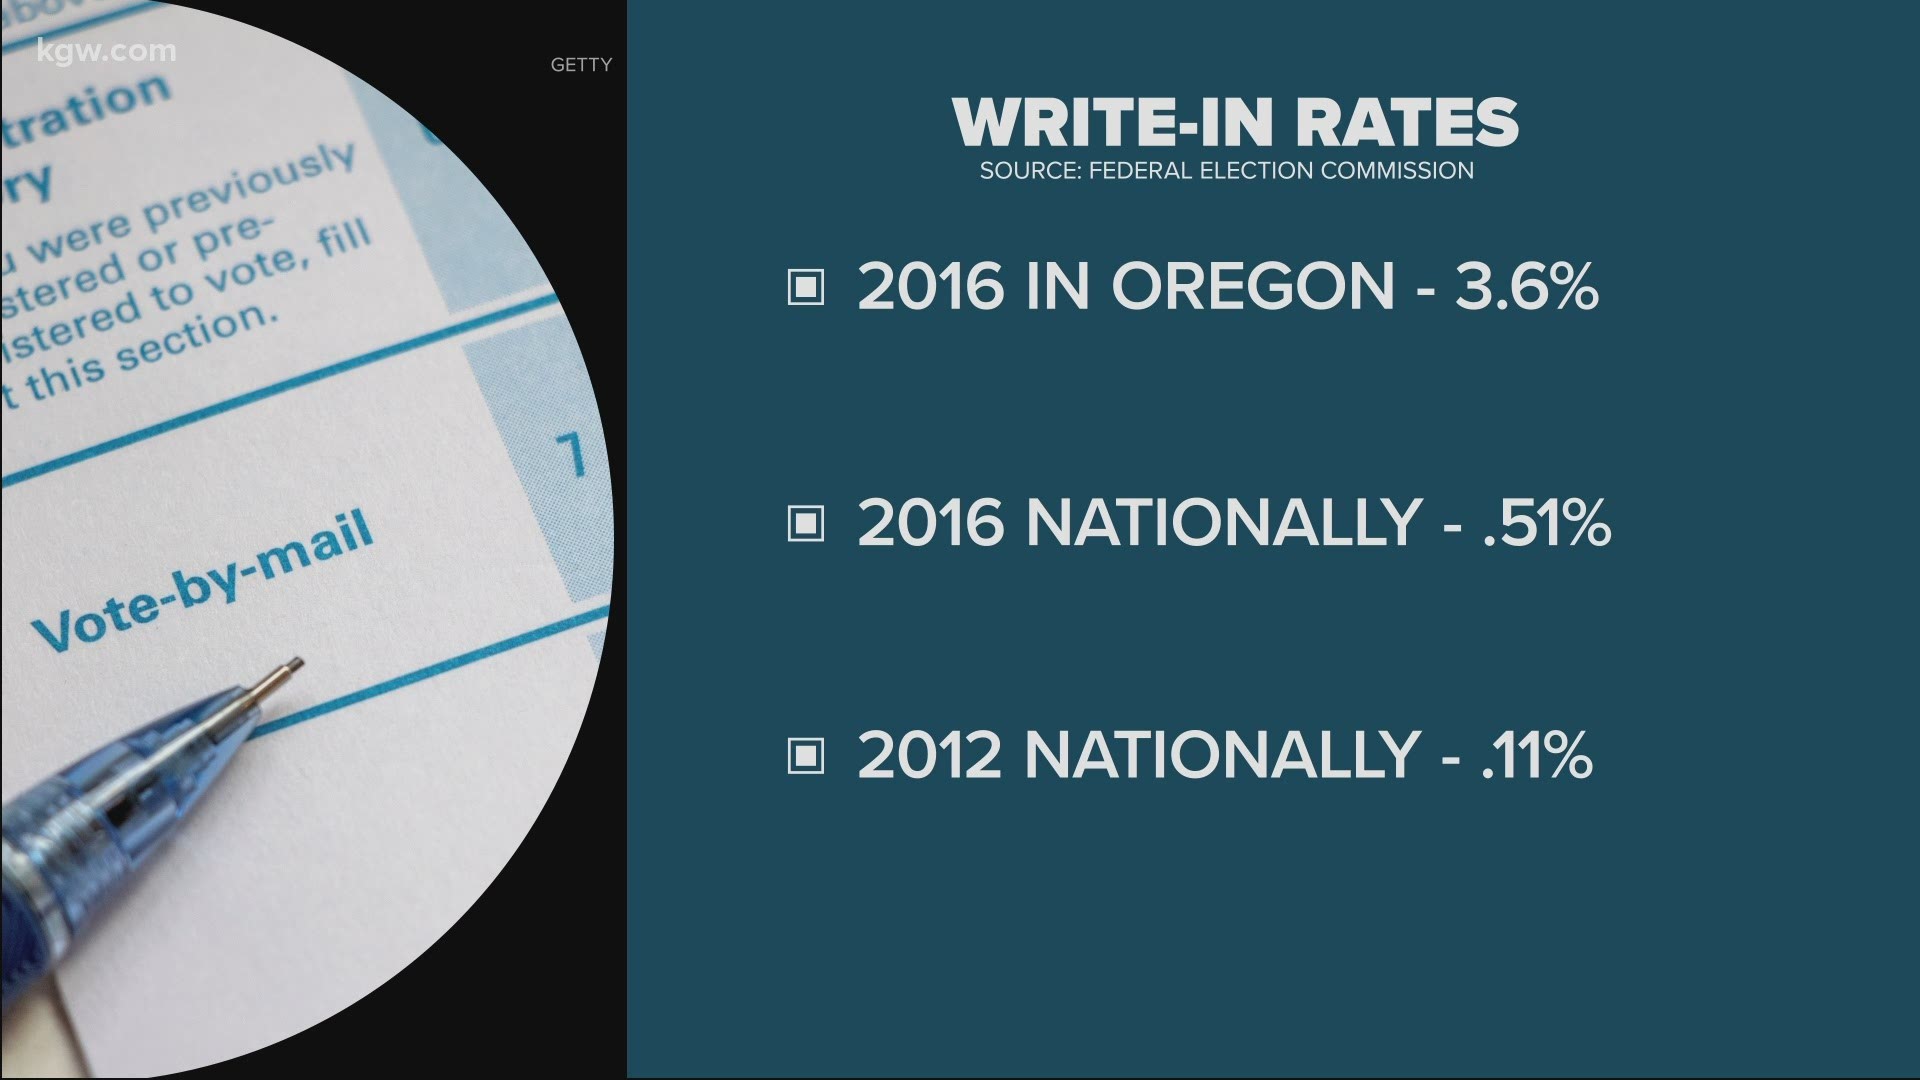 Oregon, along with several other states, has pretty loose rules on who can be written in as a candidate on a ballot.